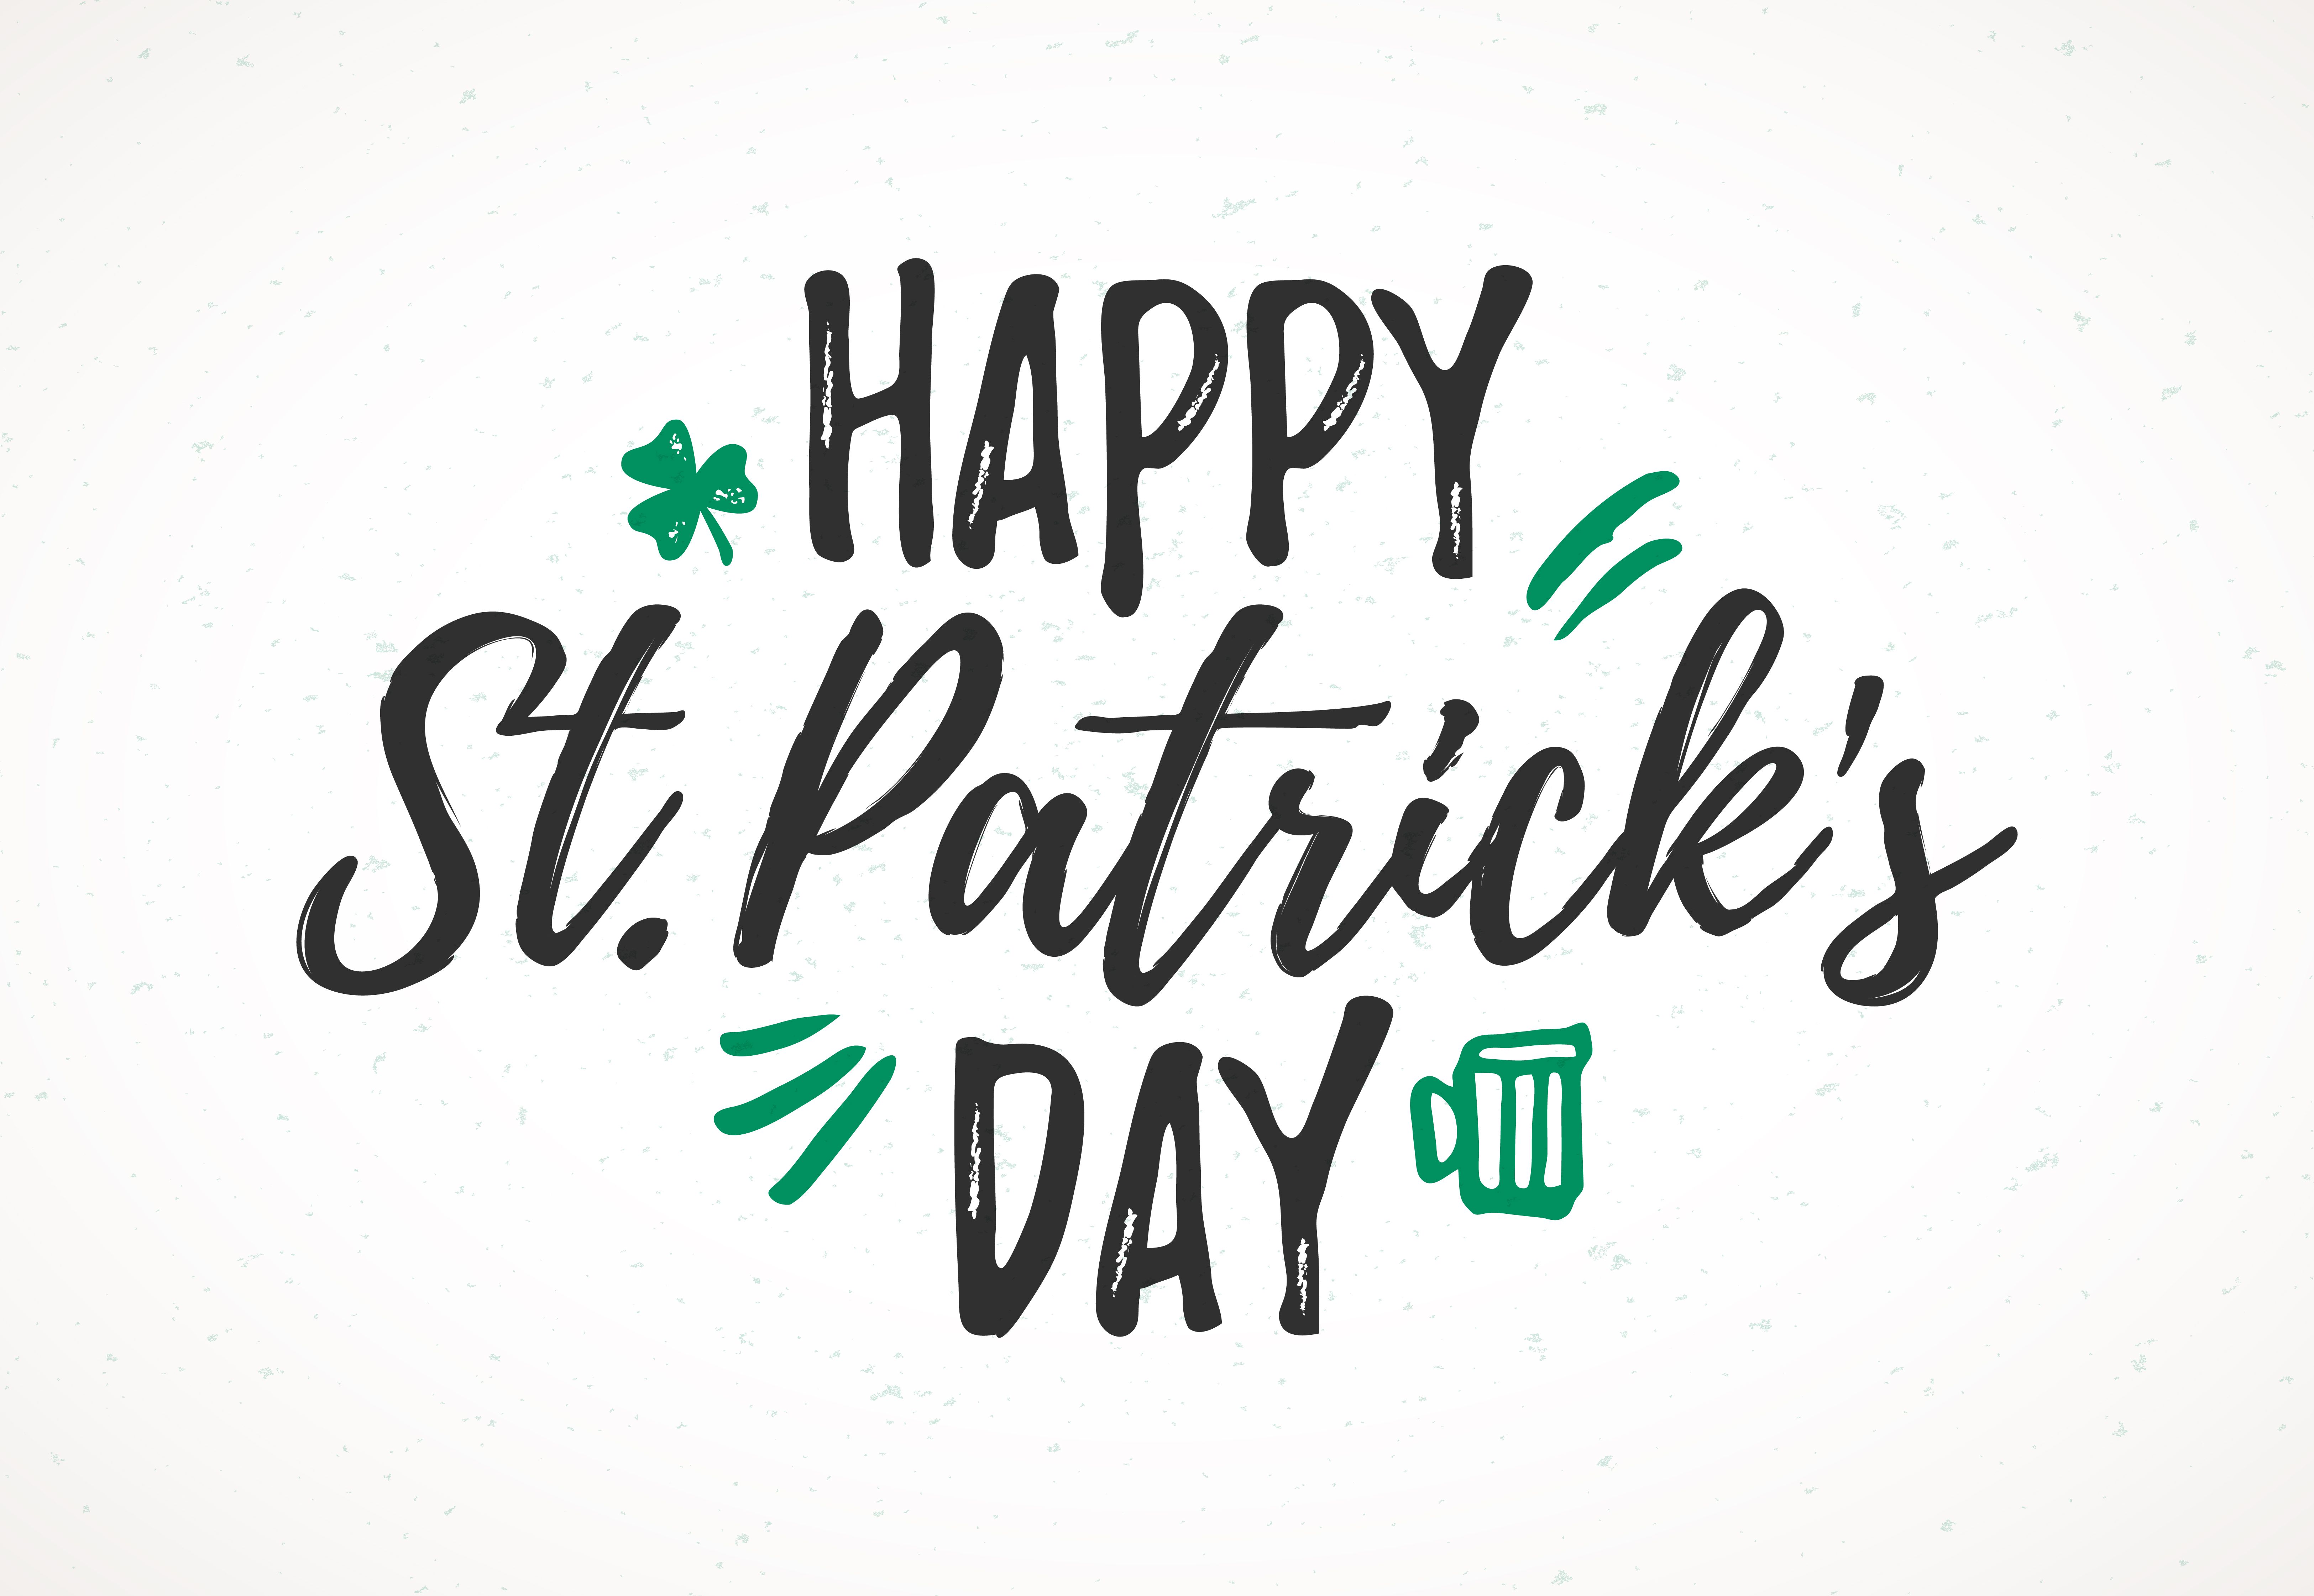 7 Free, Printable St. Patrick's Day Cards